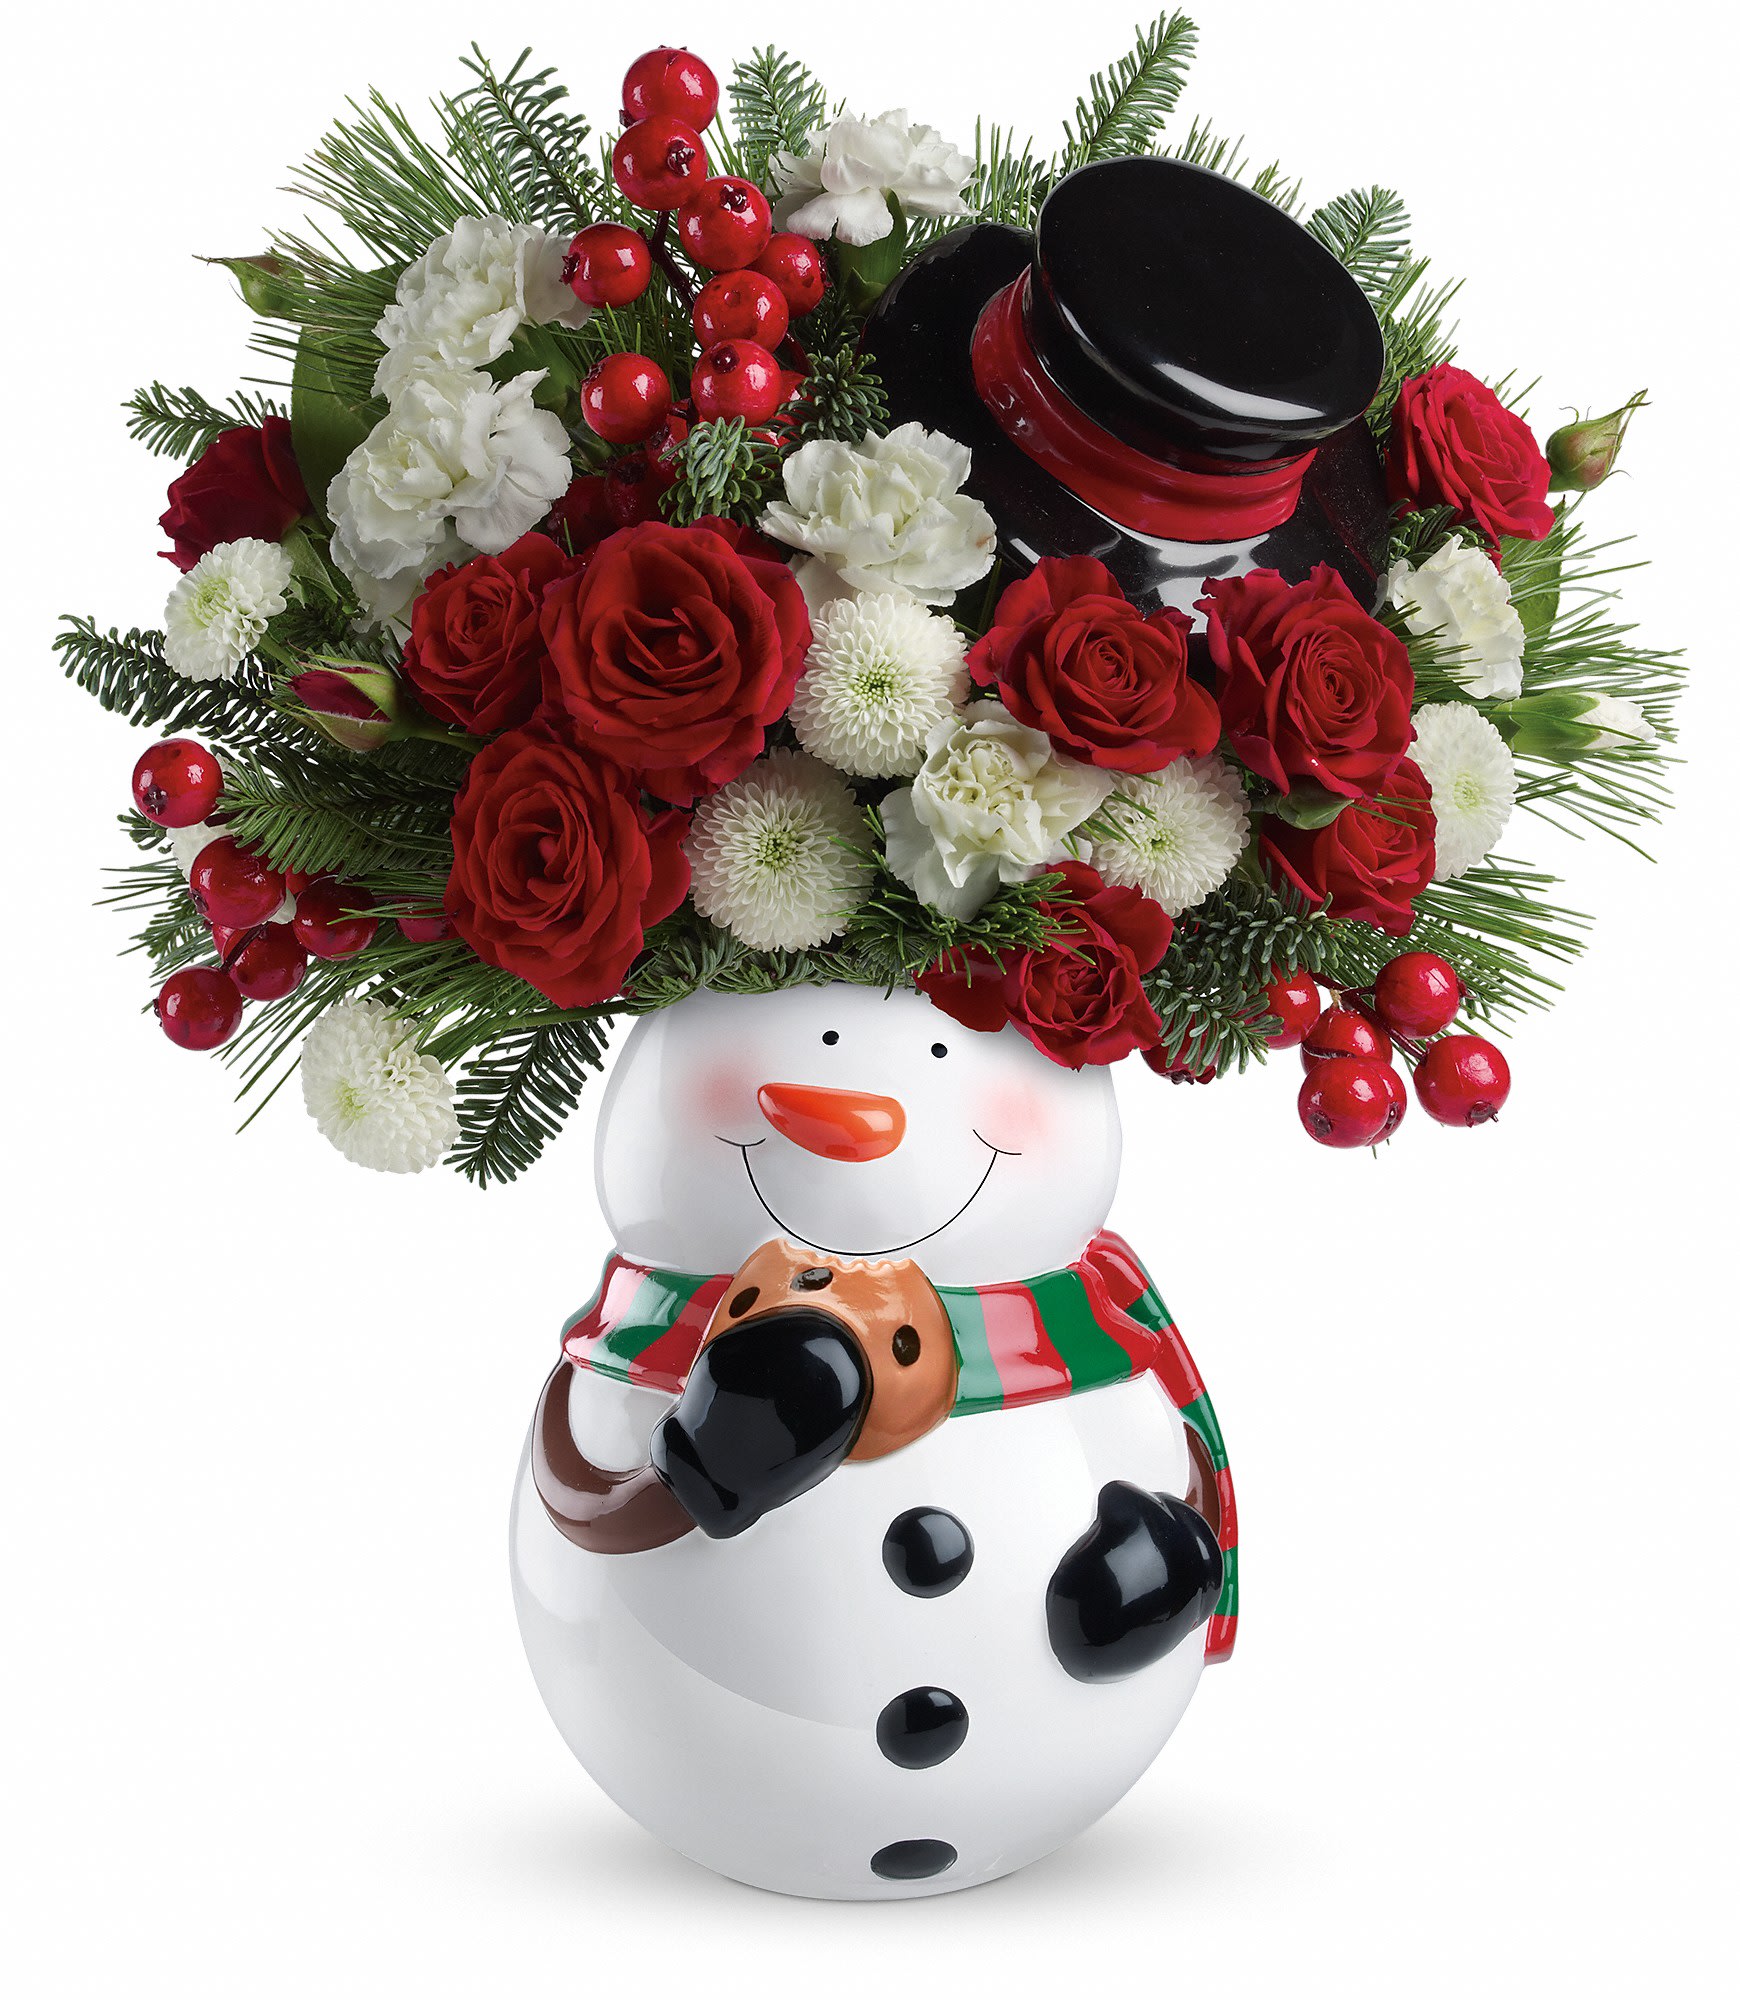 Teleflora's Cookie Jar Greetings Bouquet - Includes red spray roses, white miniature carnations, white button chrysanthemums, noble fir, white pine, lemon leaf and red berries. Delivered in an exclusive Snowman Cookie Jar. Approximately 12 1/2&quot; W x 13 3/4&quot; H. T13X410A